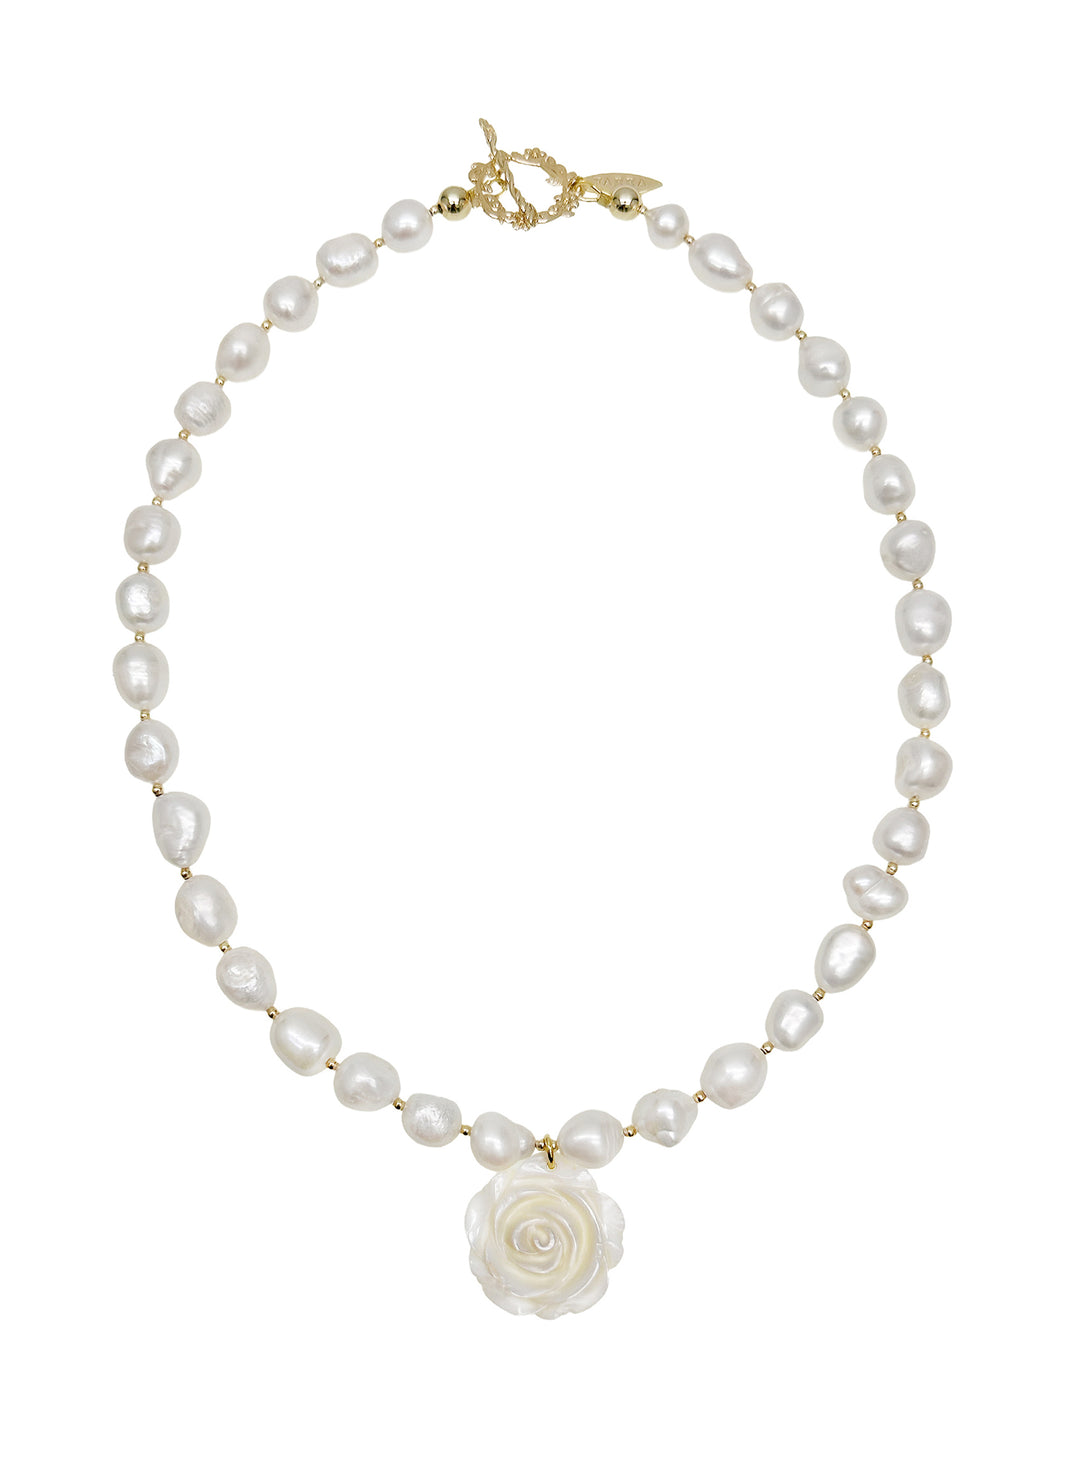 Freshwater Pearls With Rose Pendant Choker Necklace LN062 - FARRA